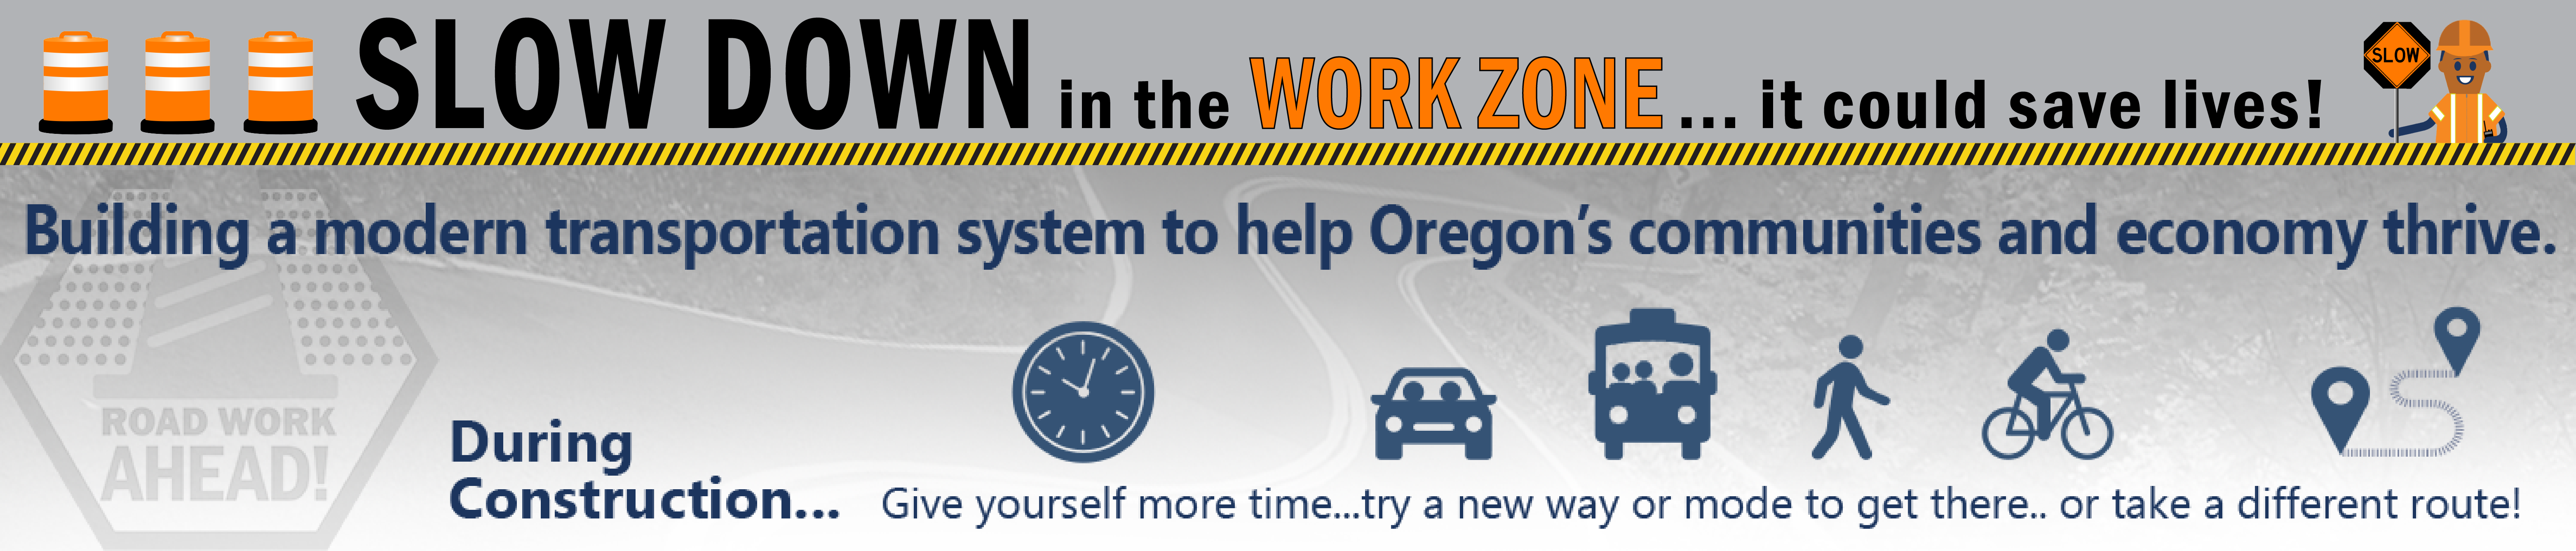 Banner: Slow down, in the work zone it could save lives. Building a modern transportation system to help Oregon’s communities and economy thrive. During construction, Give yourself more time, try a new way or mode to get there or take a different route.